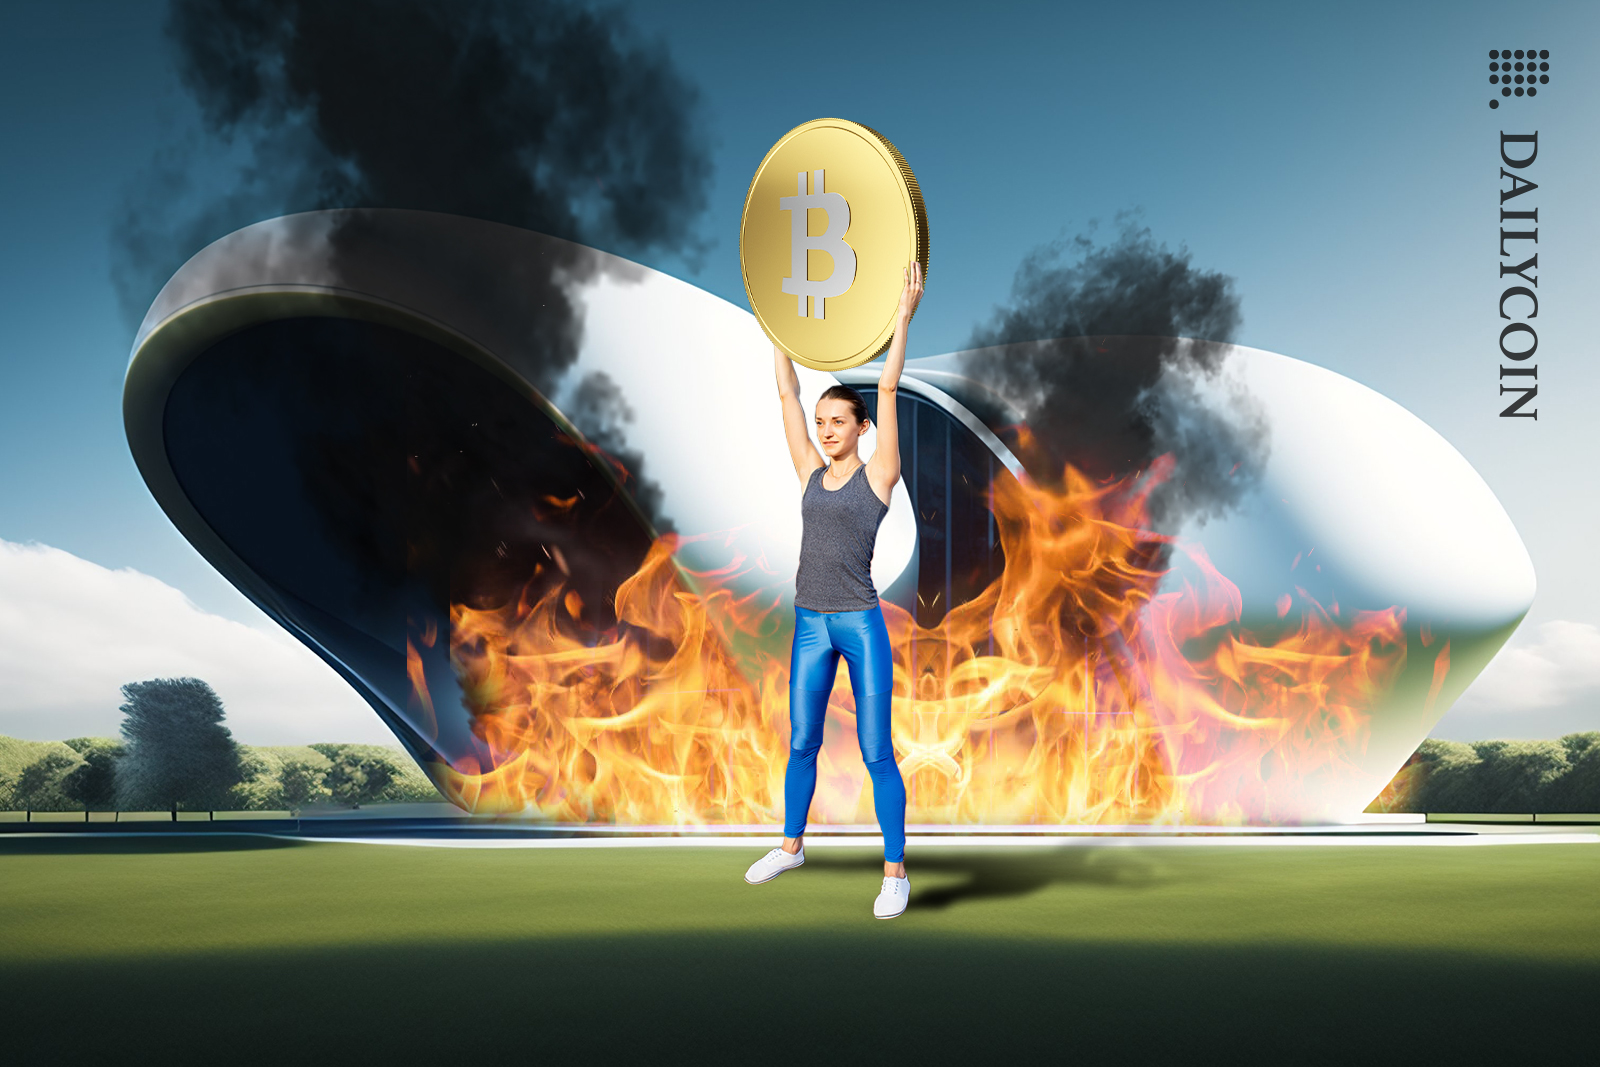 Woman holding a Bitcoin in front of burning modern building.